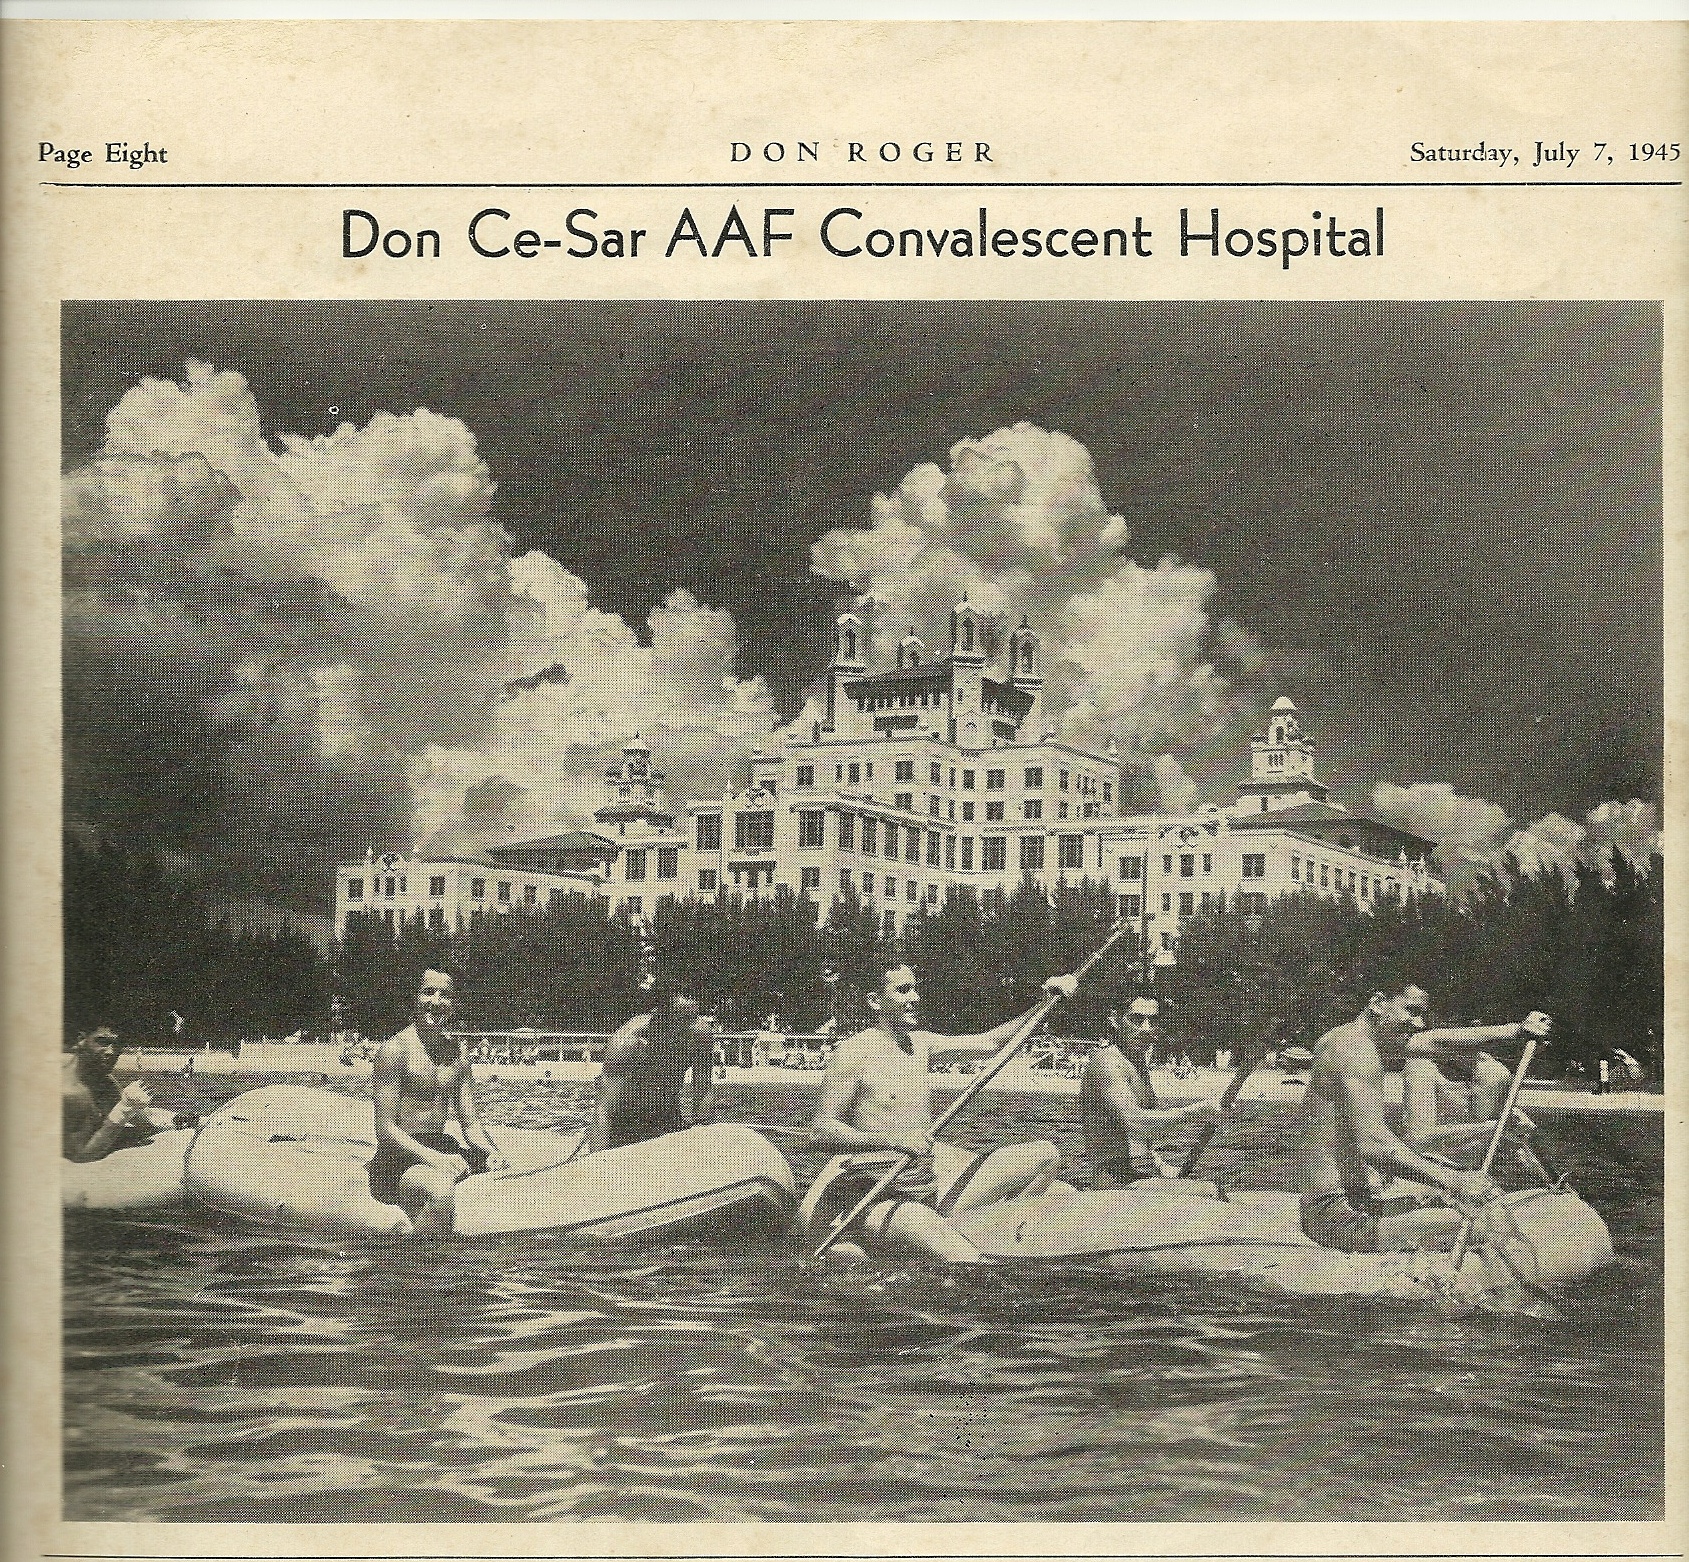 Fliers paddle in the warm waters of the Gulf of Mexico while recuperating from the rigors of combat at the Don Ce-Sar’s convalescent center in 1945